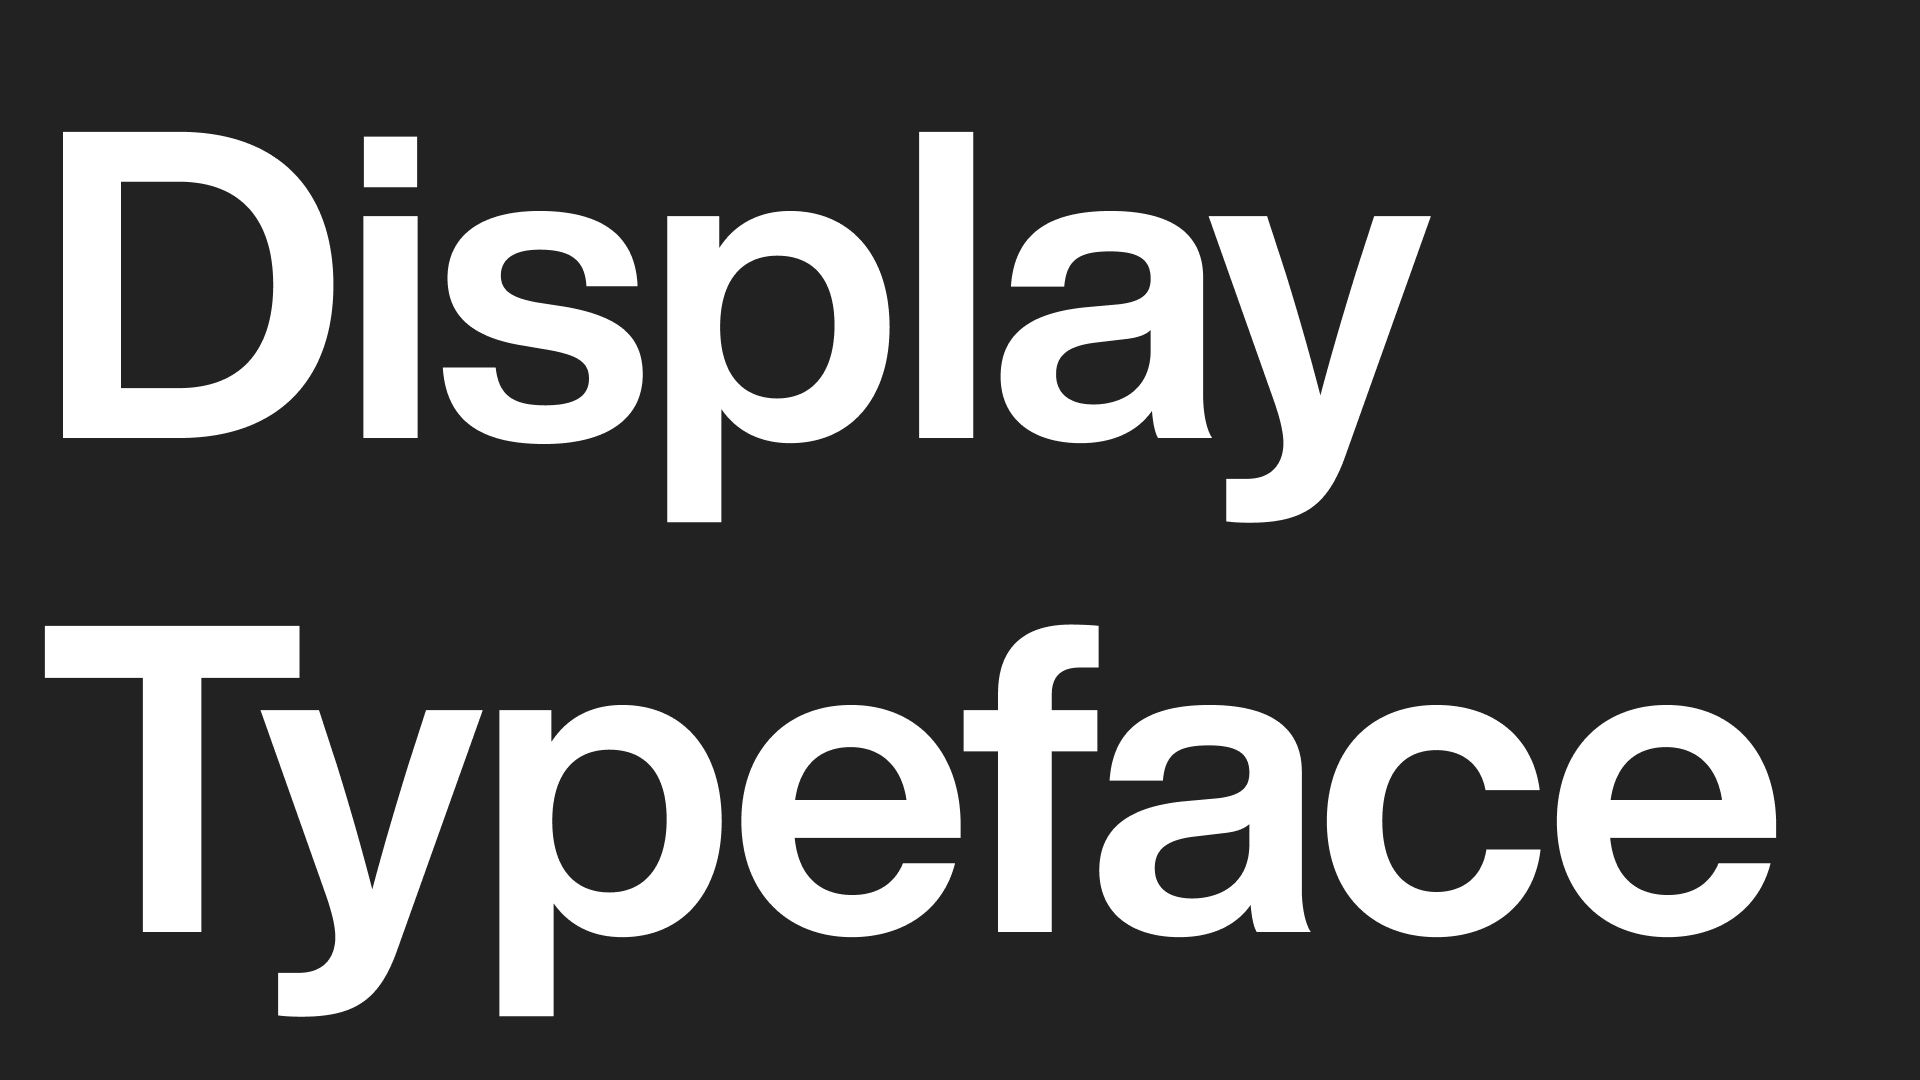 Helvetica Is Actually a Display Typeface